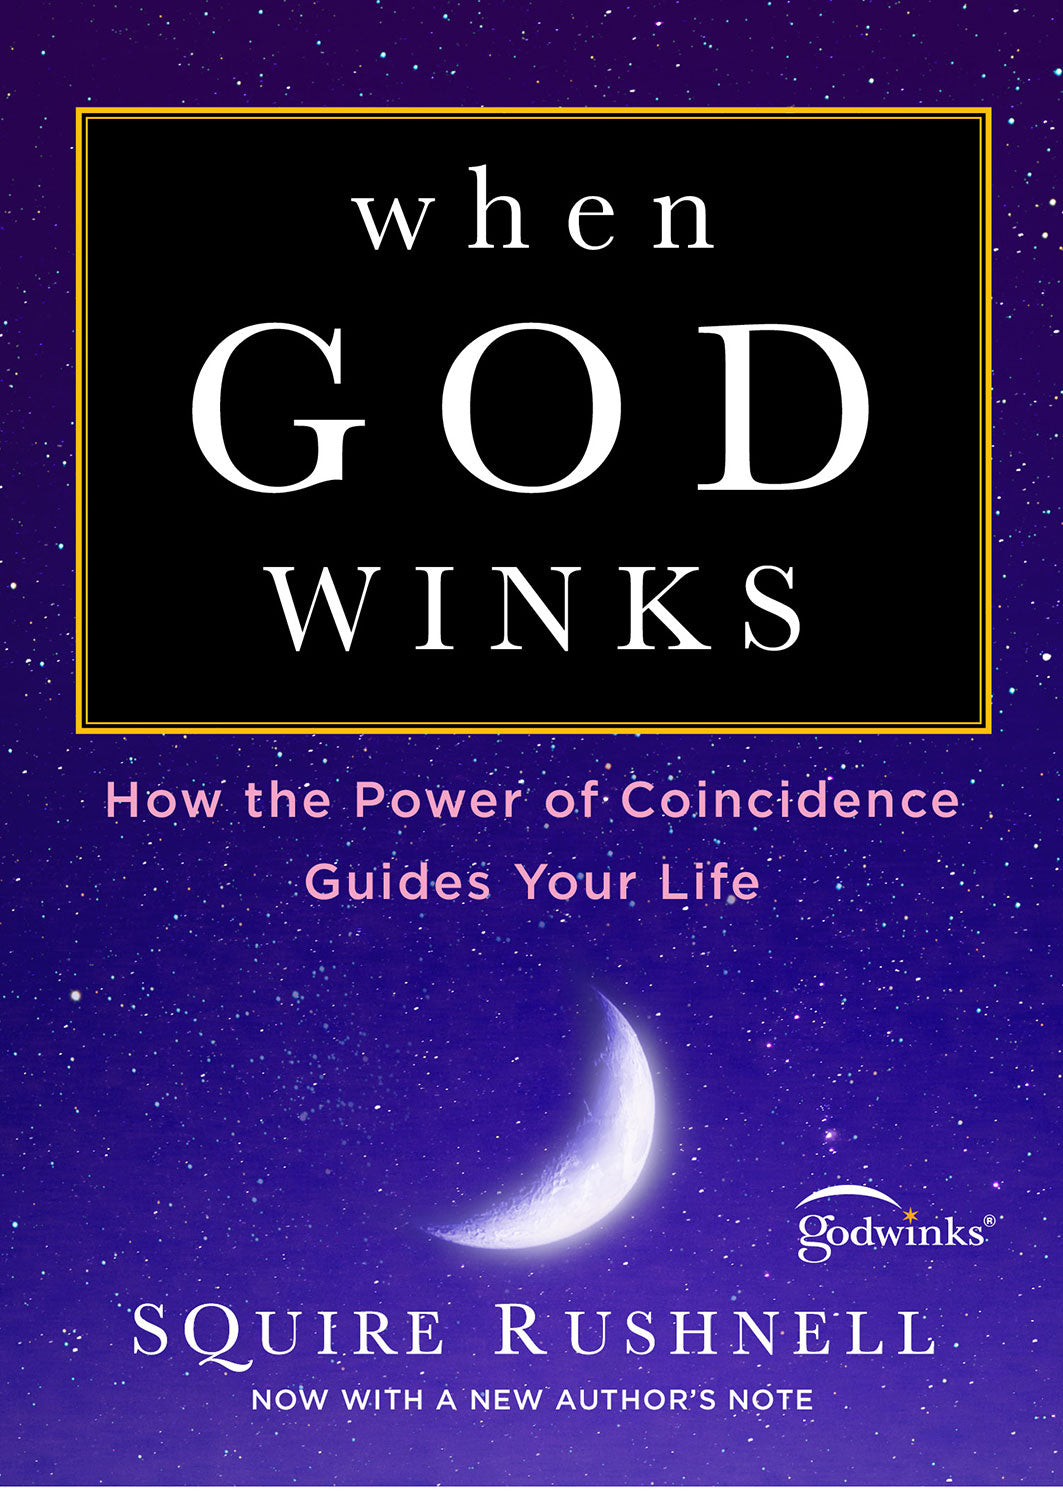 Winks　When　Free　Autographed　God　Greeting　(Paperback)　Qualifies　Card　Godwinks